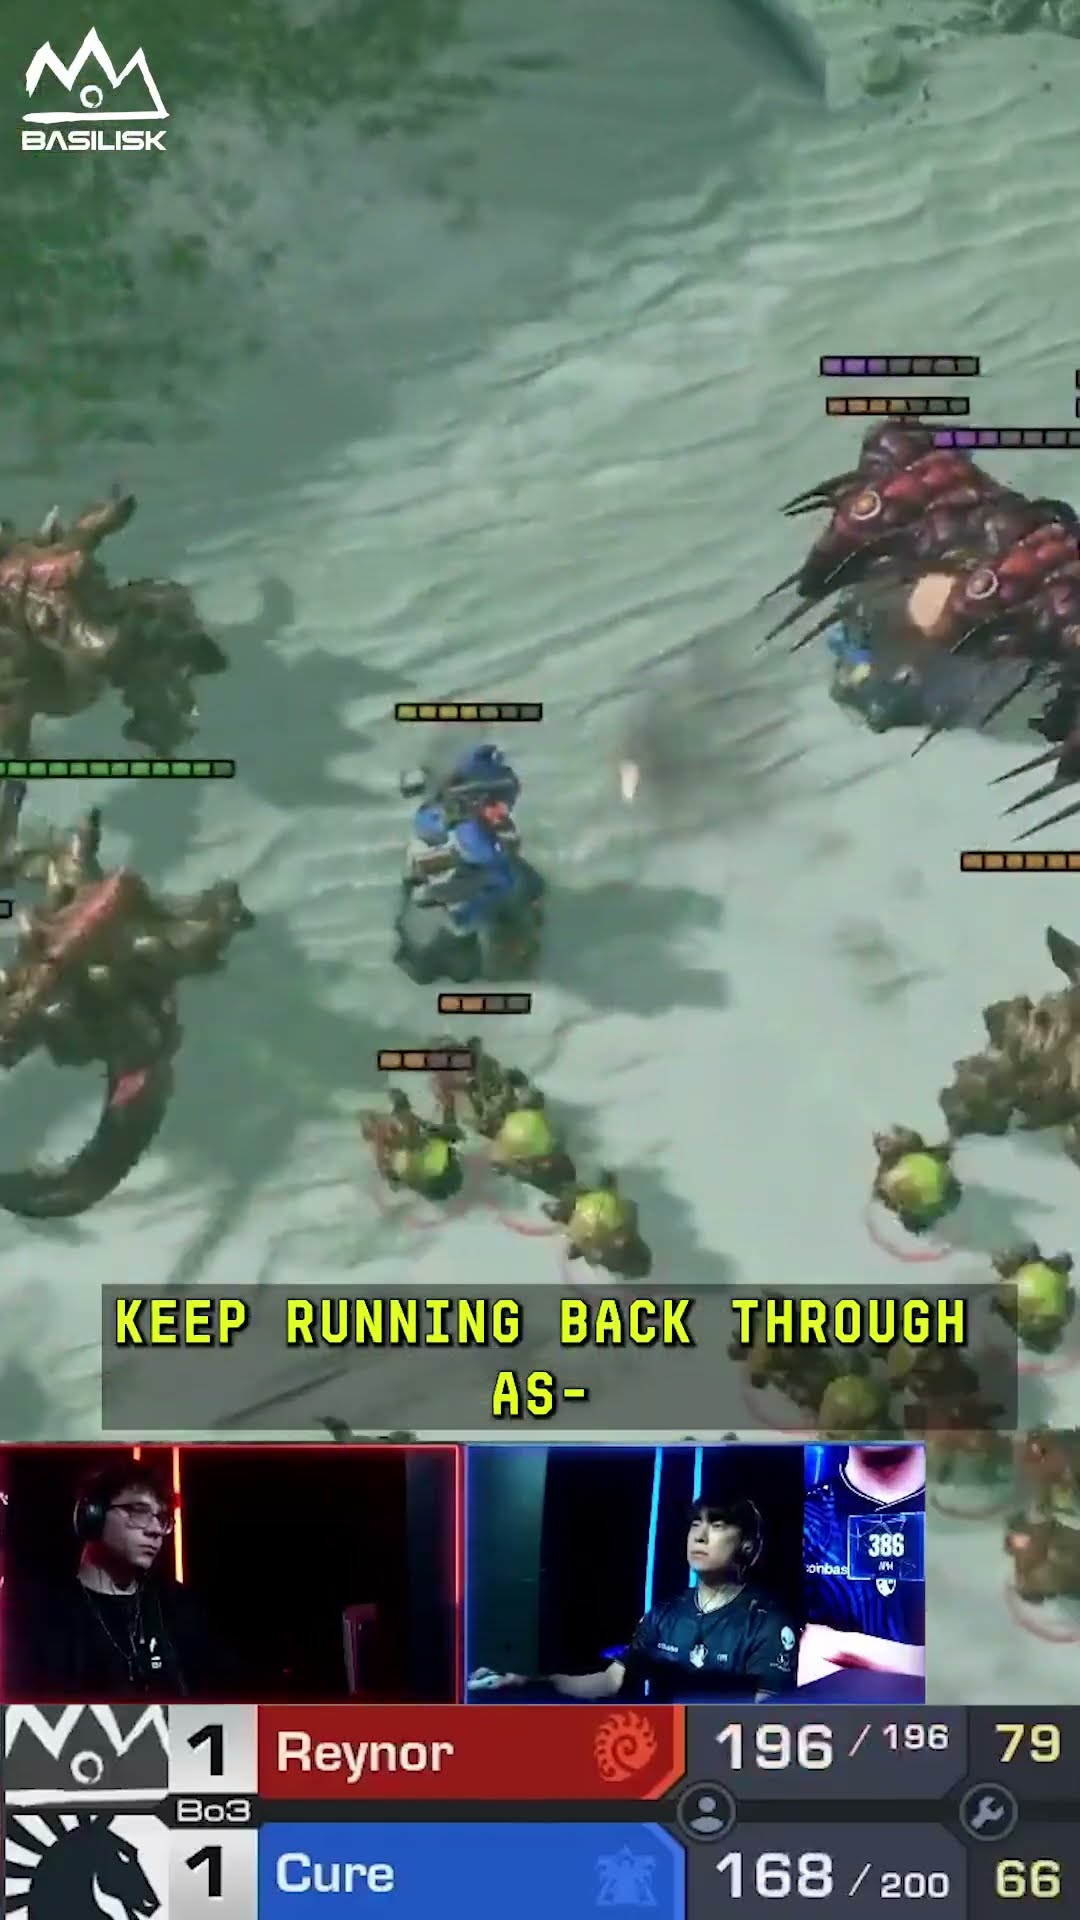 Reynor swarms Cure at #Dreamhack Dallas #Starcraft2